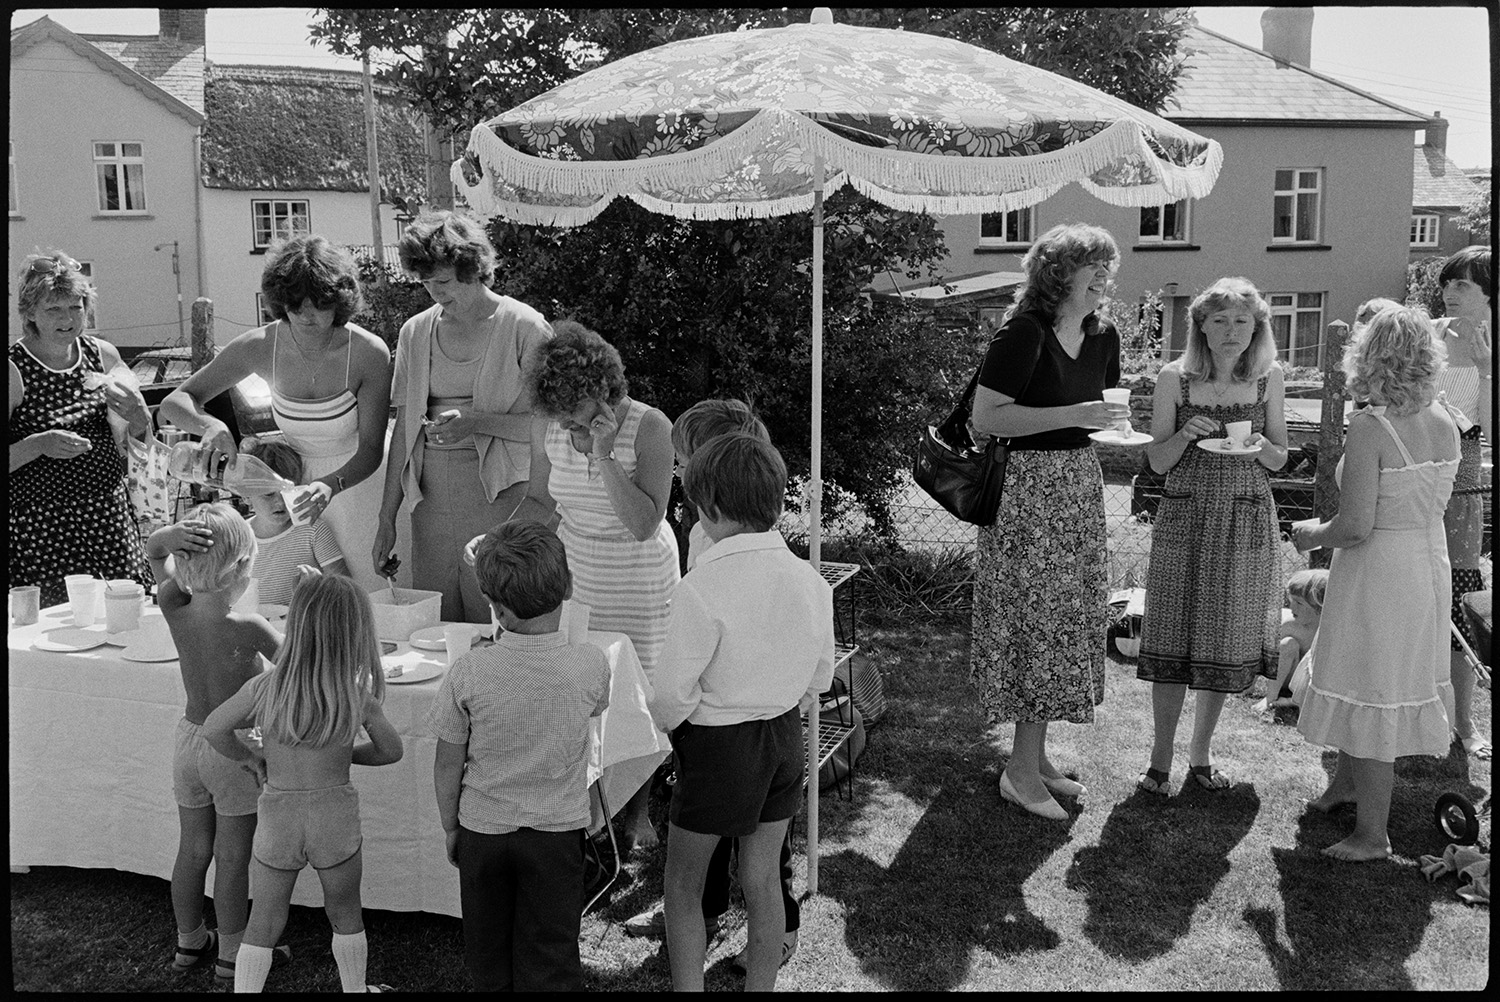 Sports day, women mothers with babies, children chatting and serving refreshments.
[Women serving drinks at a refreshment table to children and chatting under a parasol at Dolton Sports Day.]